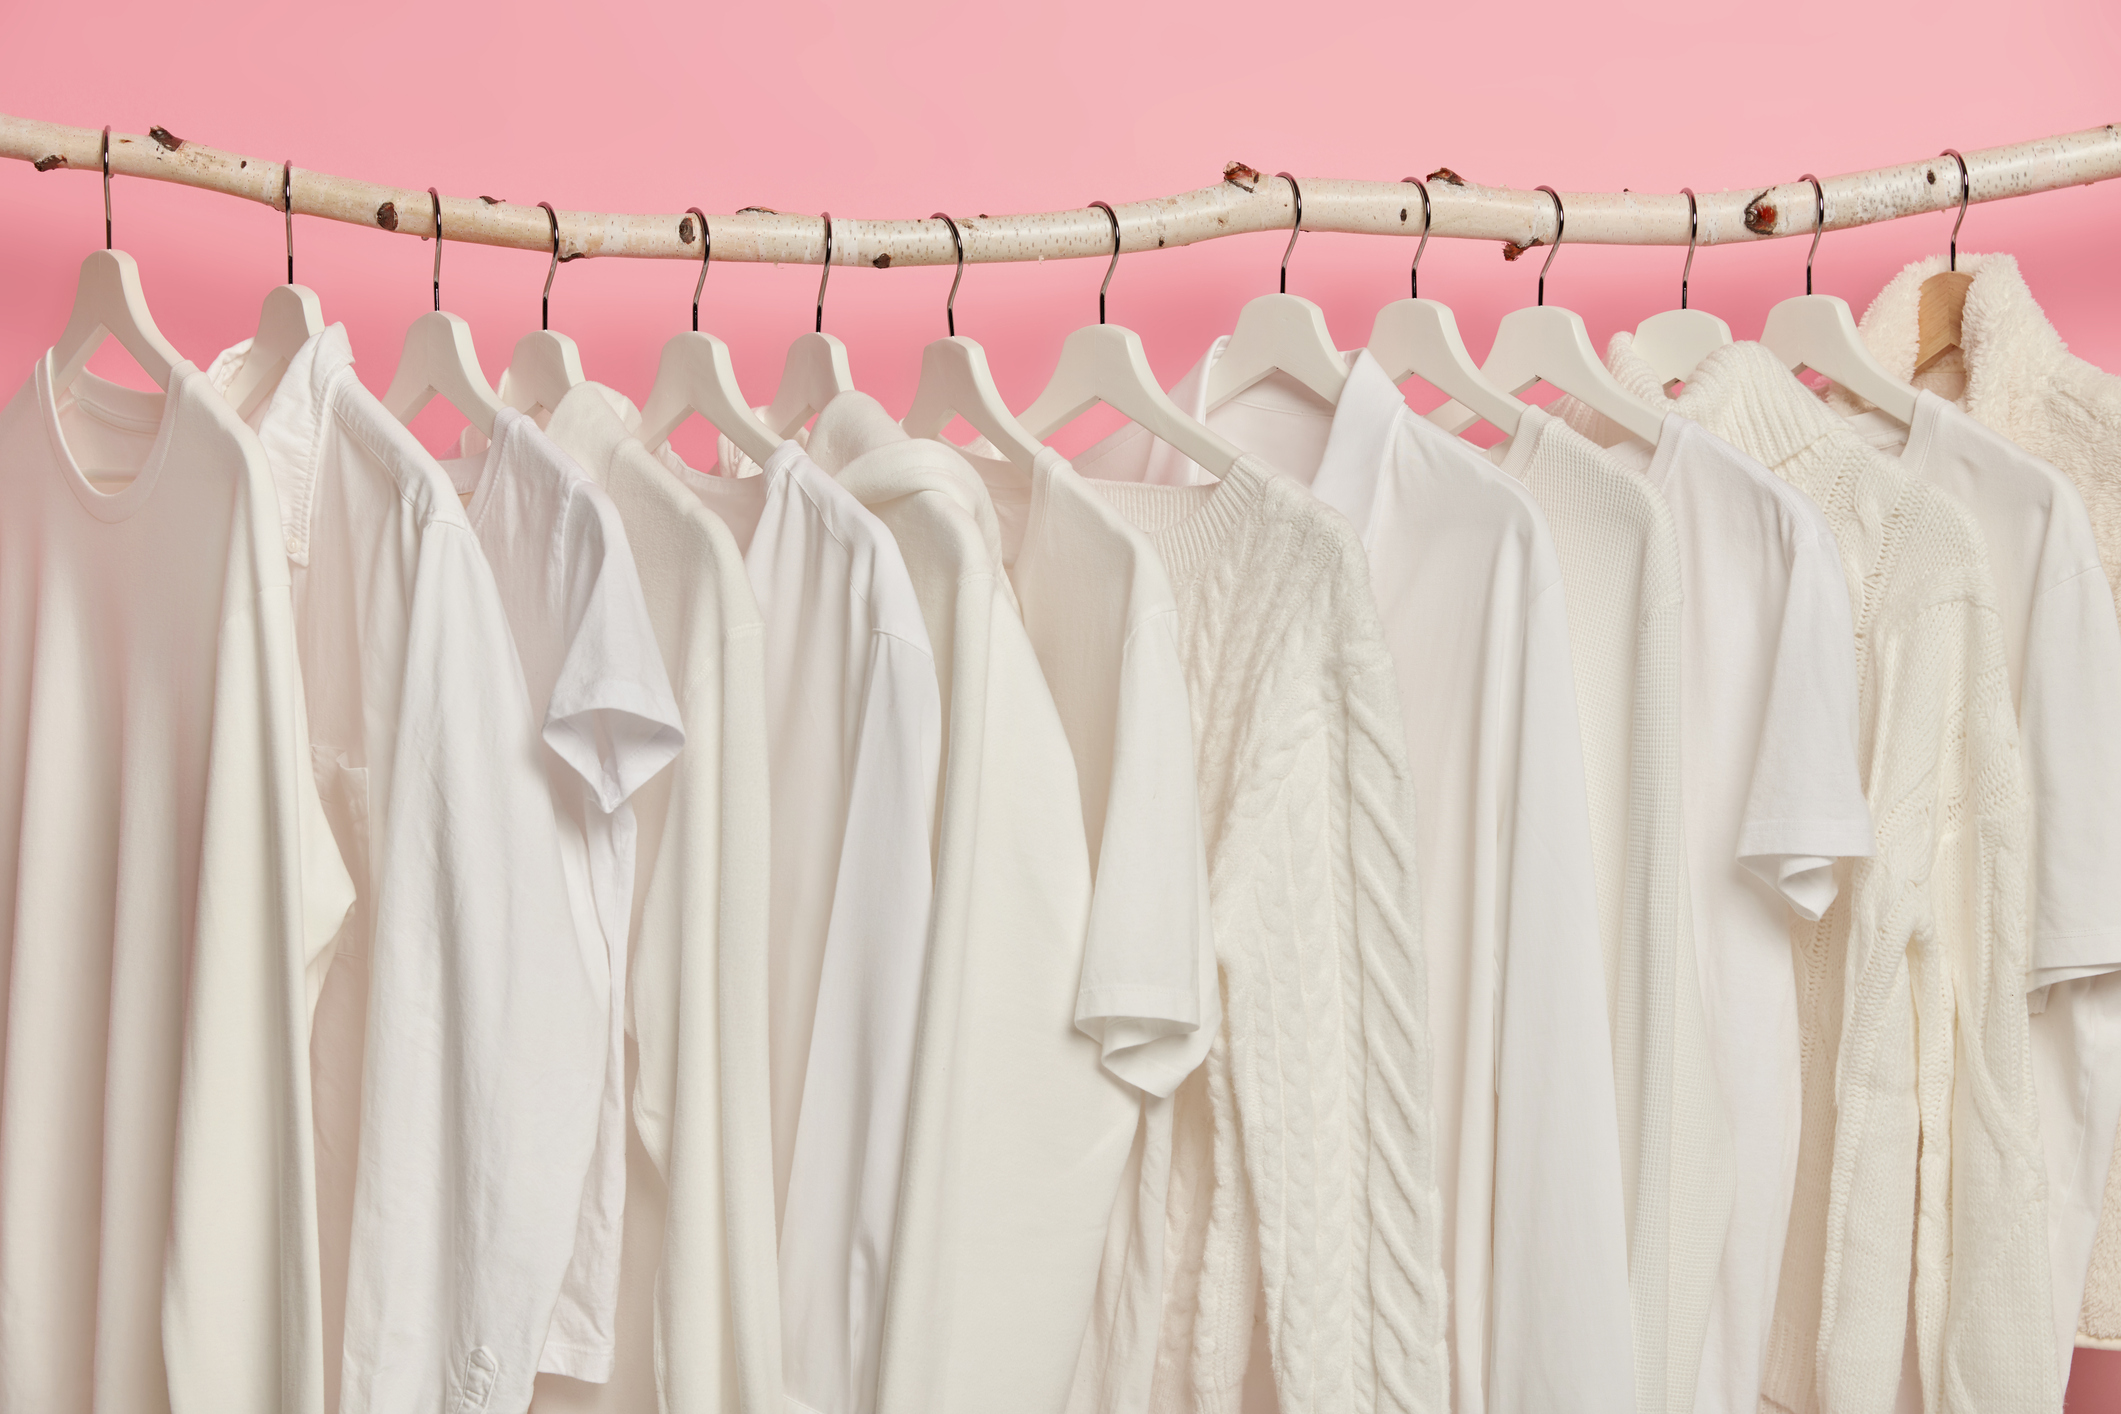 White solid clothes hanging in one row on wooden racks against pink background.